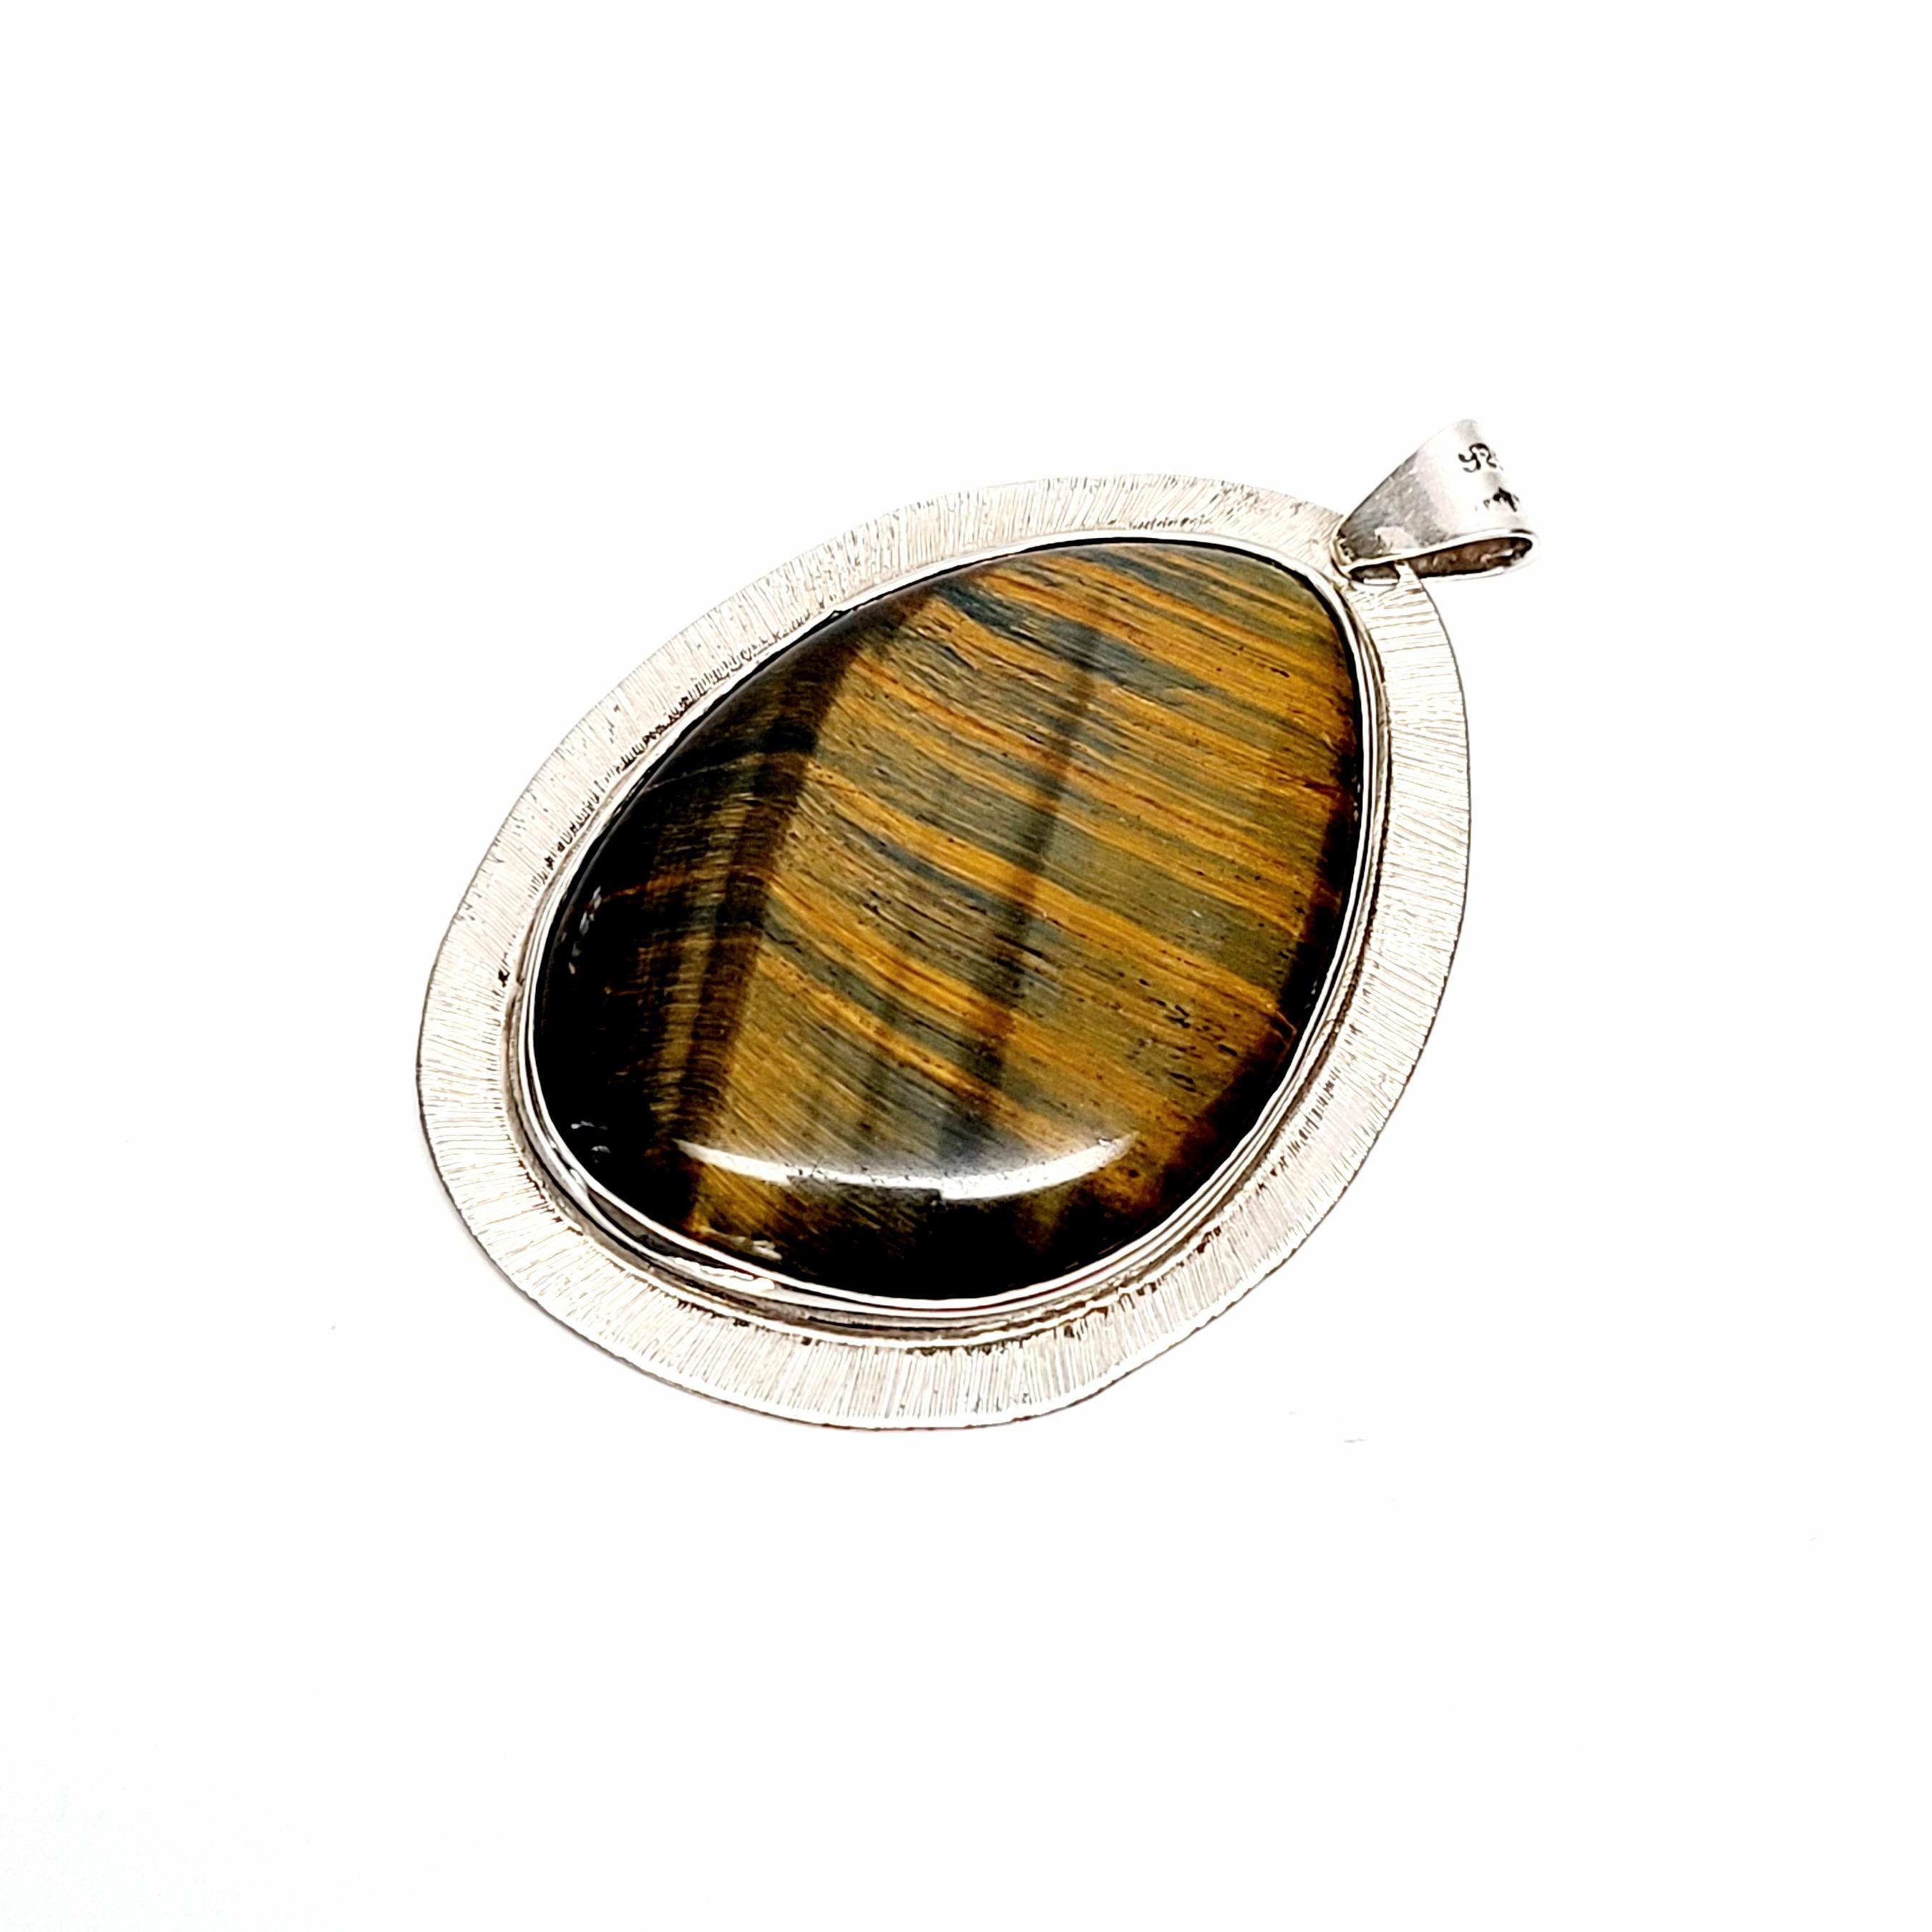 Cabochon Mexico Sterling Silver Tiger's Eye Pendant Signed LMH